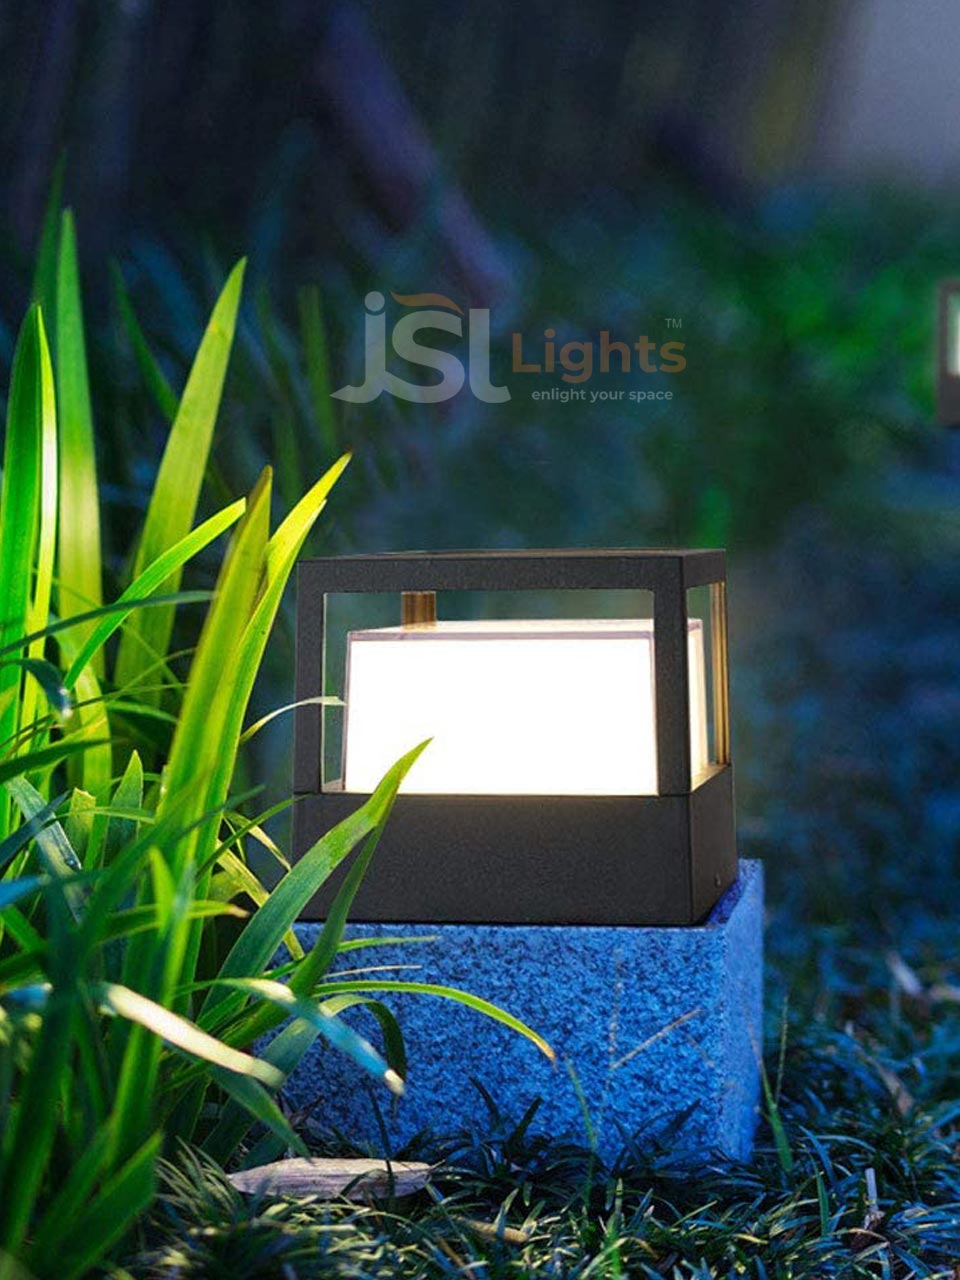 819 Small Square LED Gate Light for Outdoor Pillar 11 Inches Post Top Lamp with 12W Inbuilt LED Light Aluminium Body IP65 ON